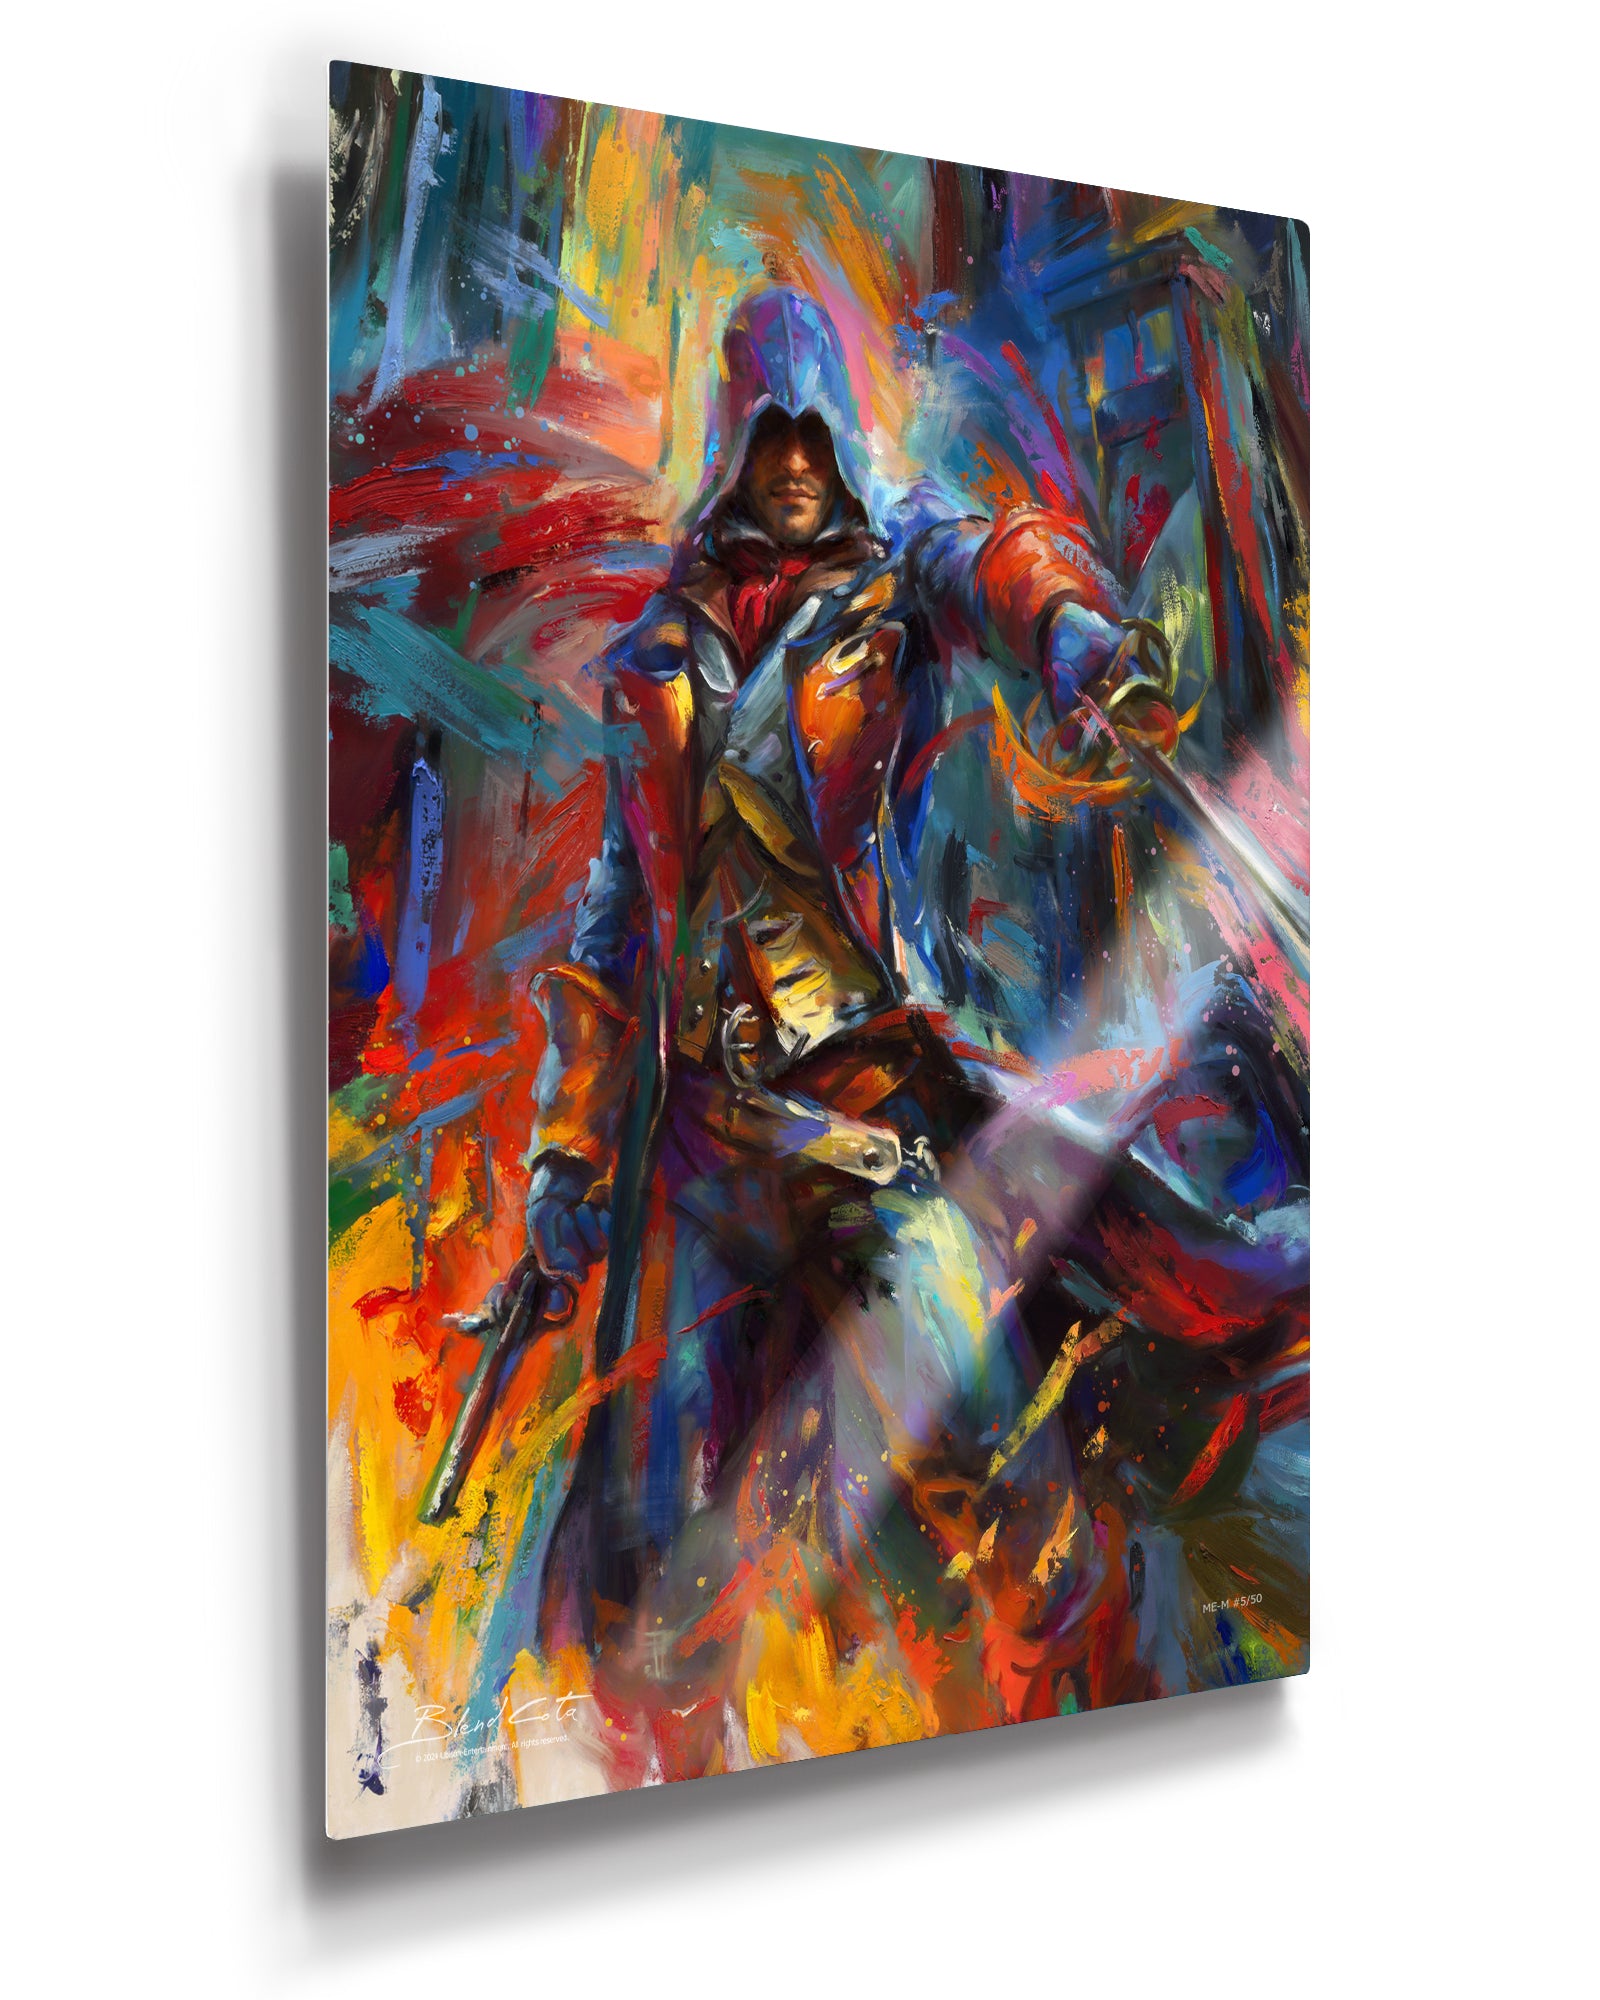 Limited Edition glossy metal print of Assassin's Creed Arno Dorian of Unity bursting forth with energy and painted with colorful brushstrokes in an expressionistic style.